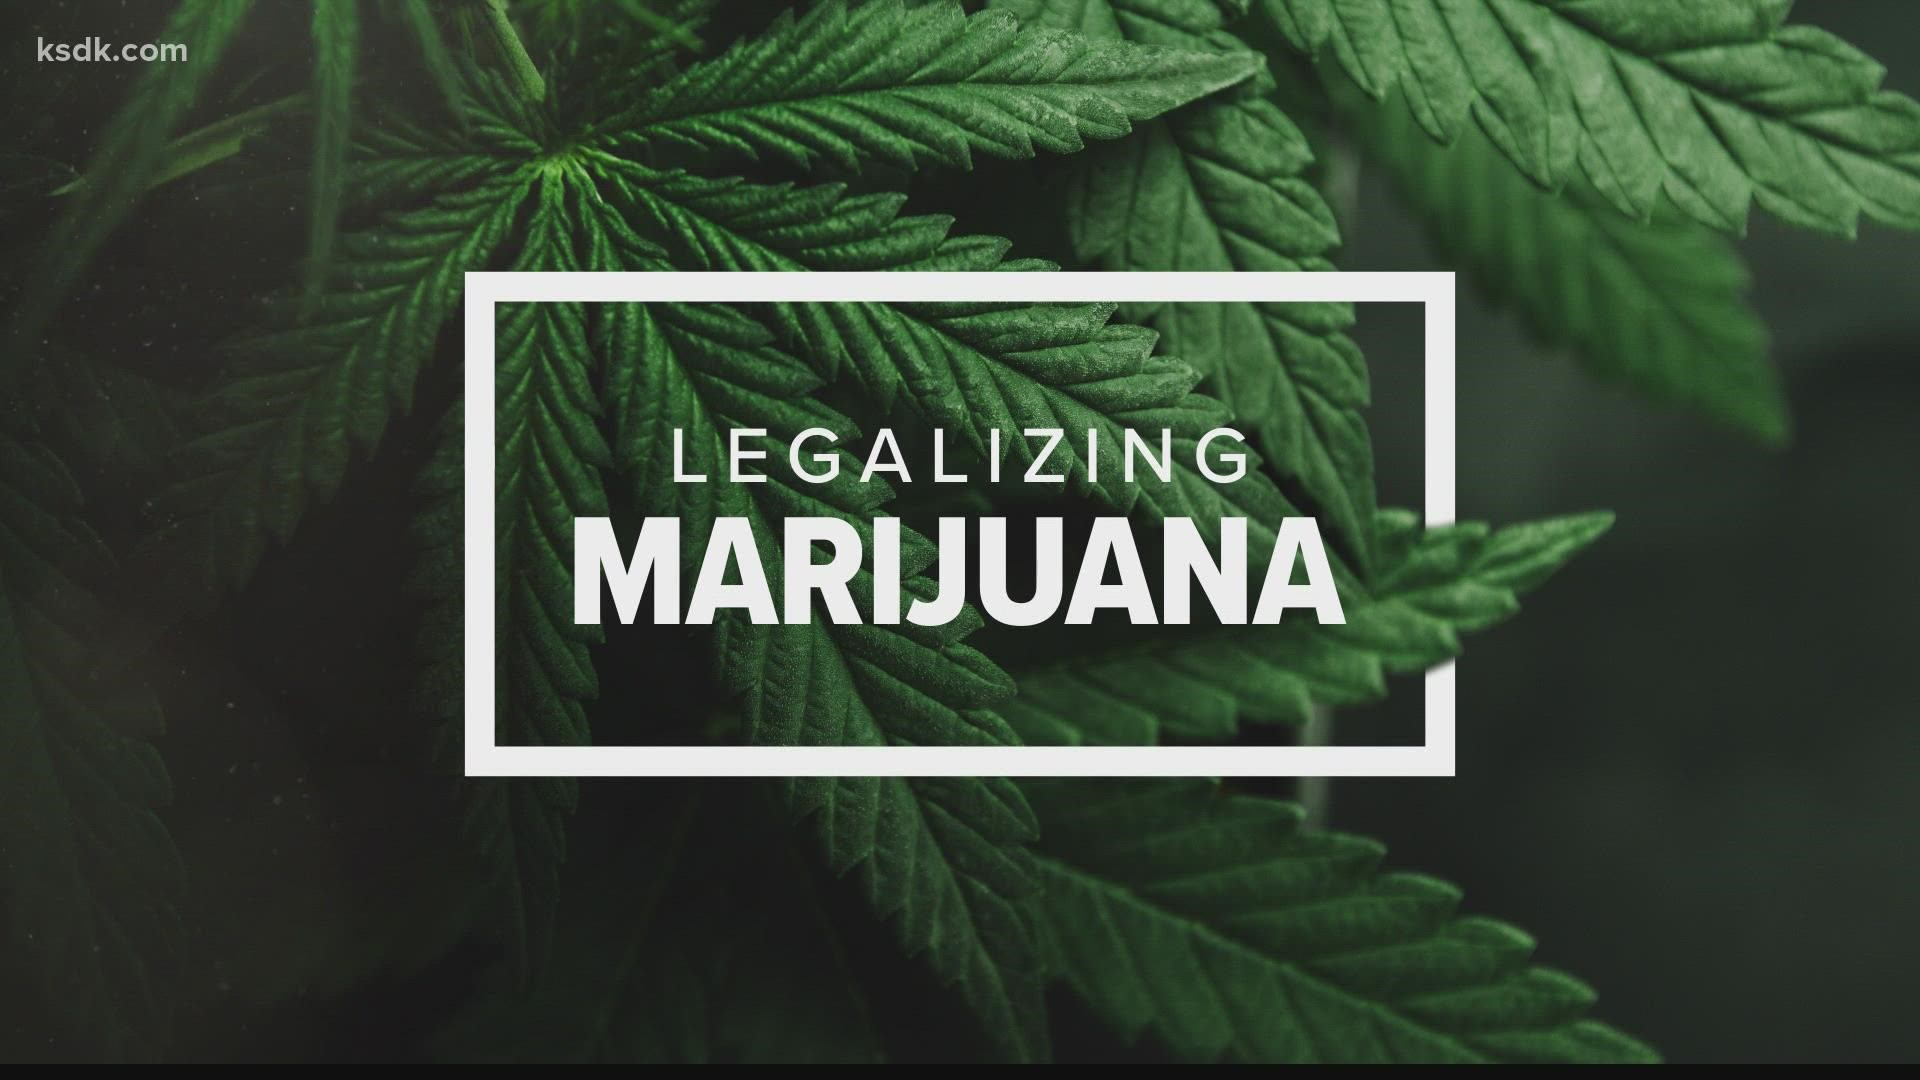 Legal MO 2022 outlines petition for possession, purchase, consumption and cultivation of marijuana for adults over 21